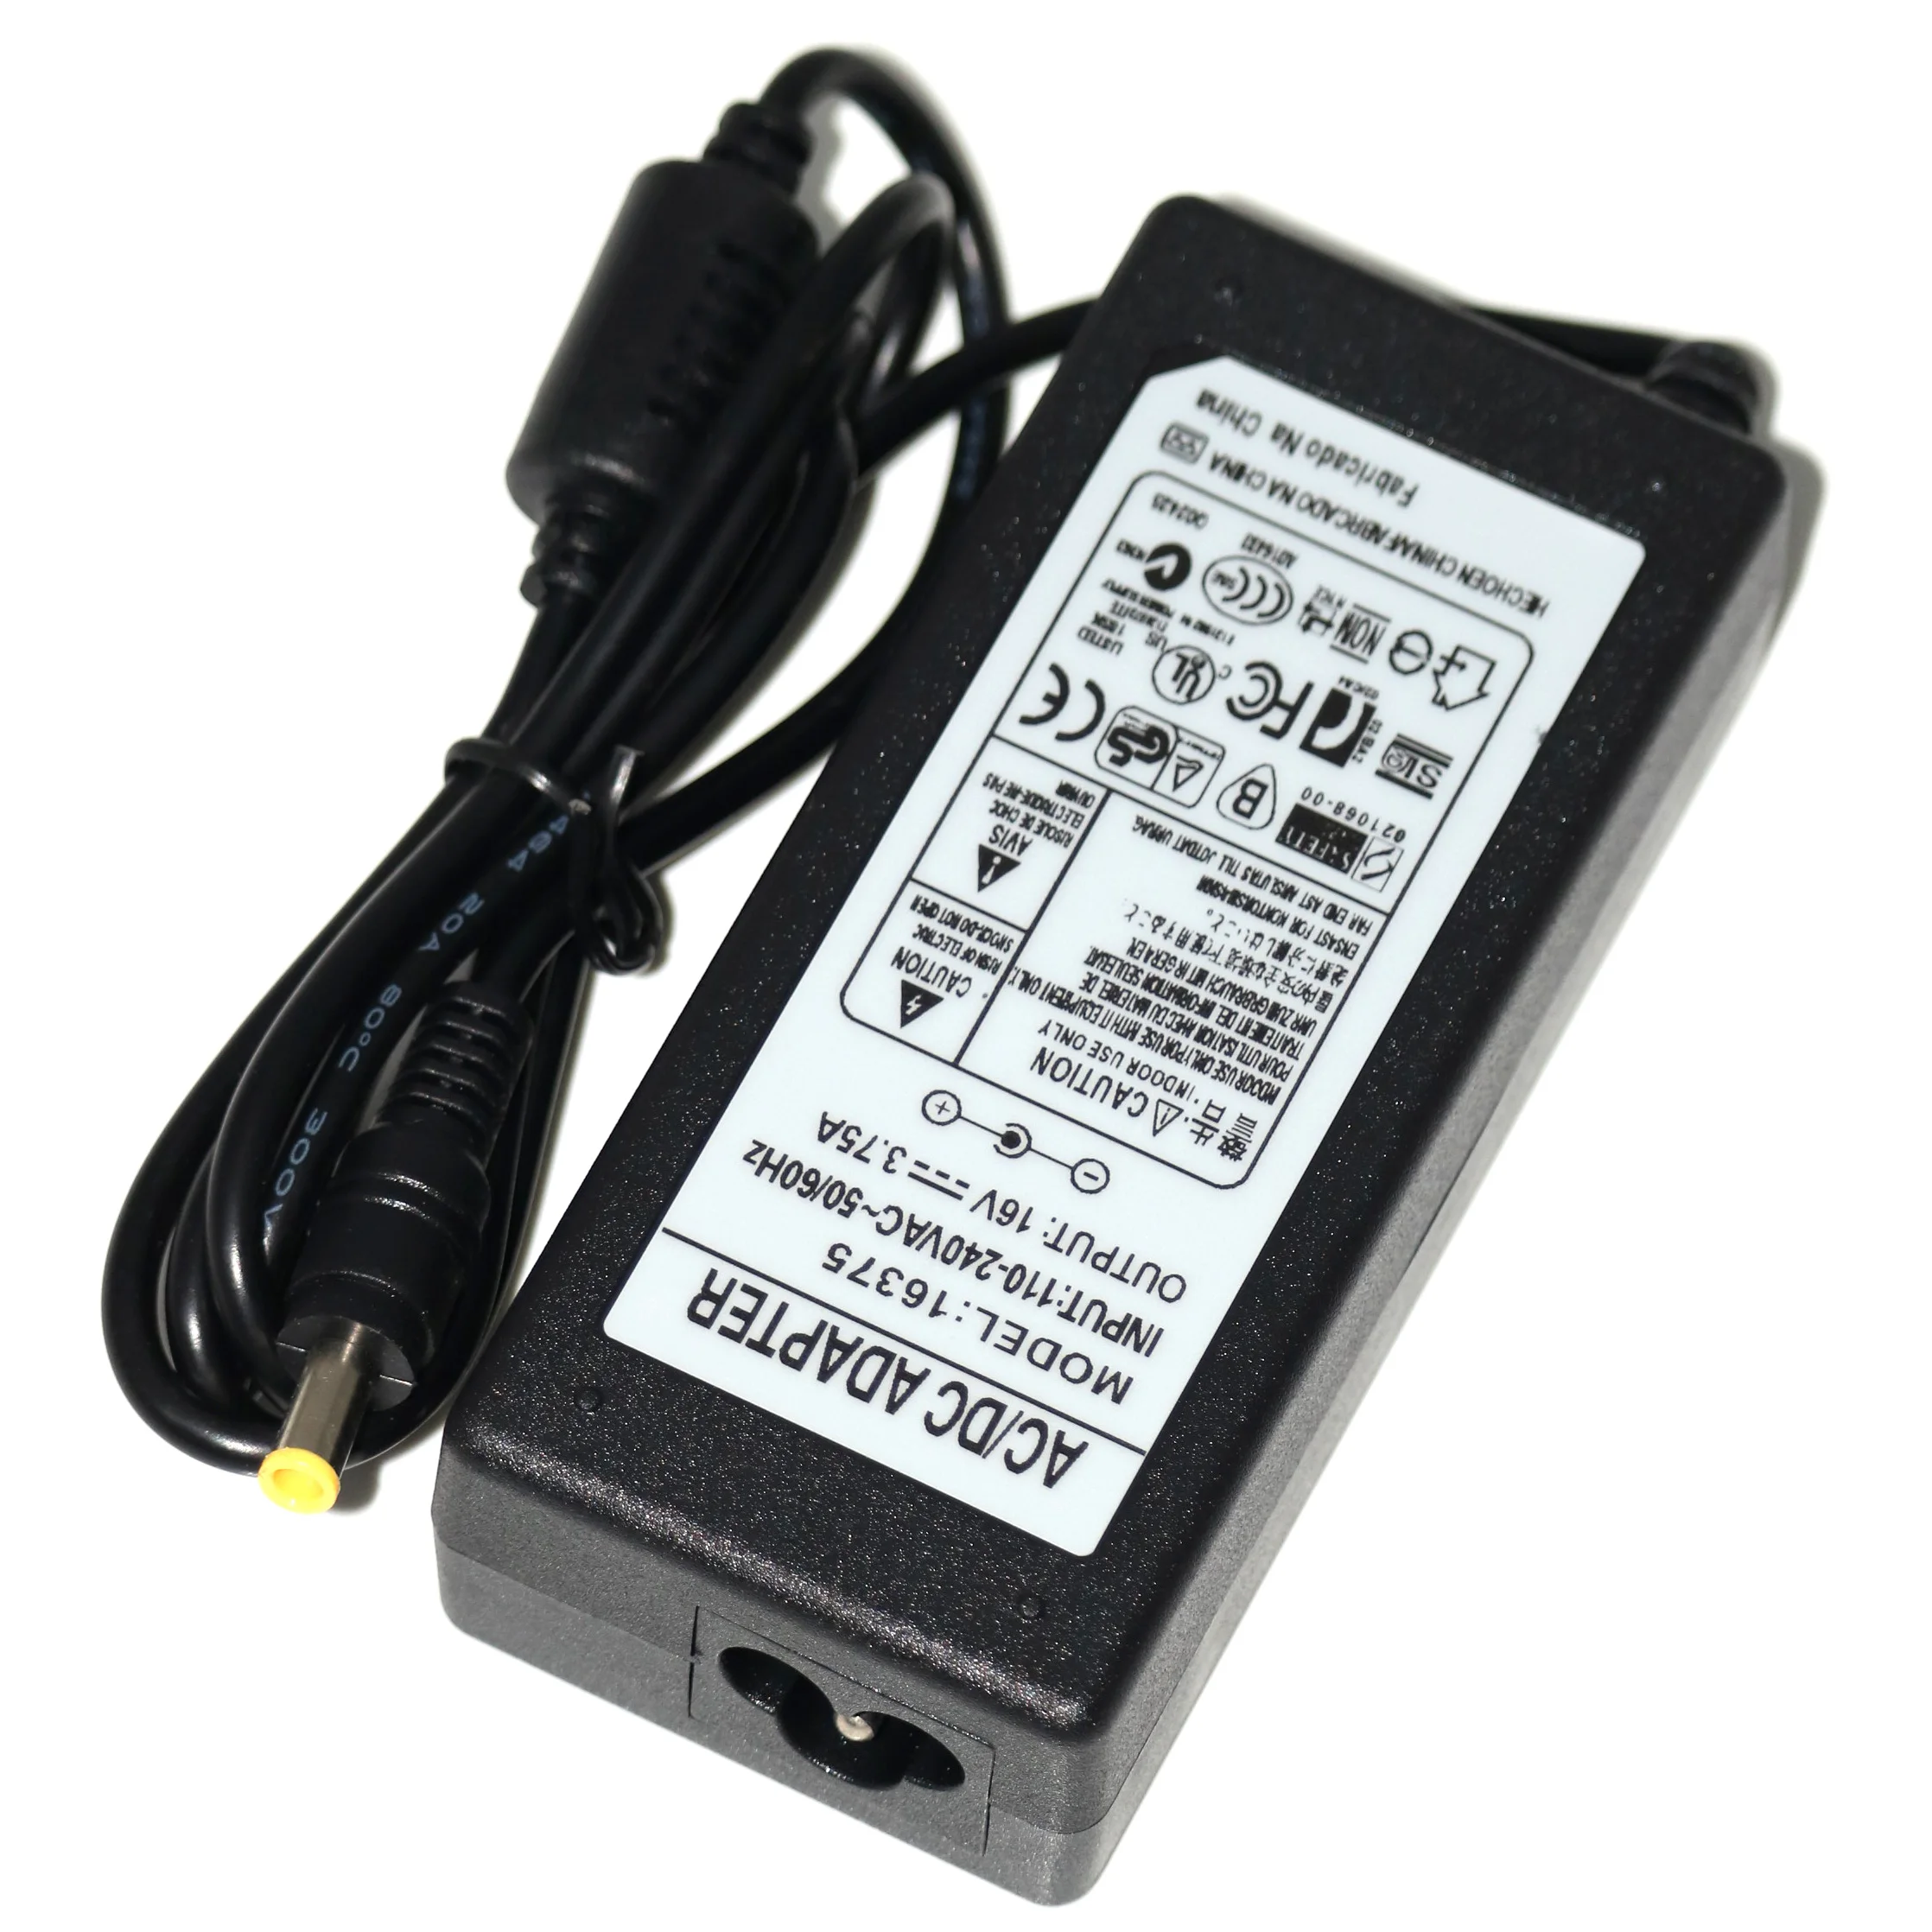 

16V 3.75A 60W Samsung Fujitsu Sony Laptop Power Adapter Charger 5.5*3.0mm